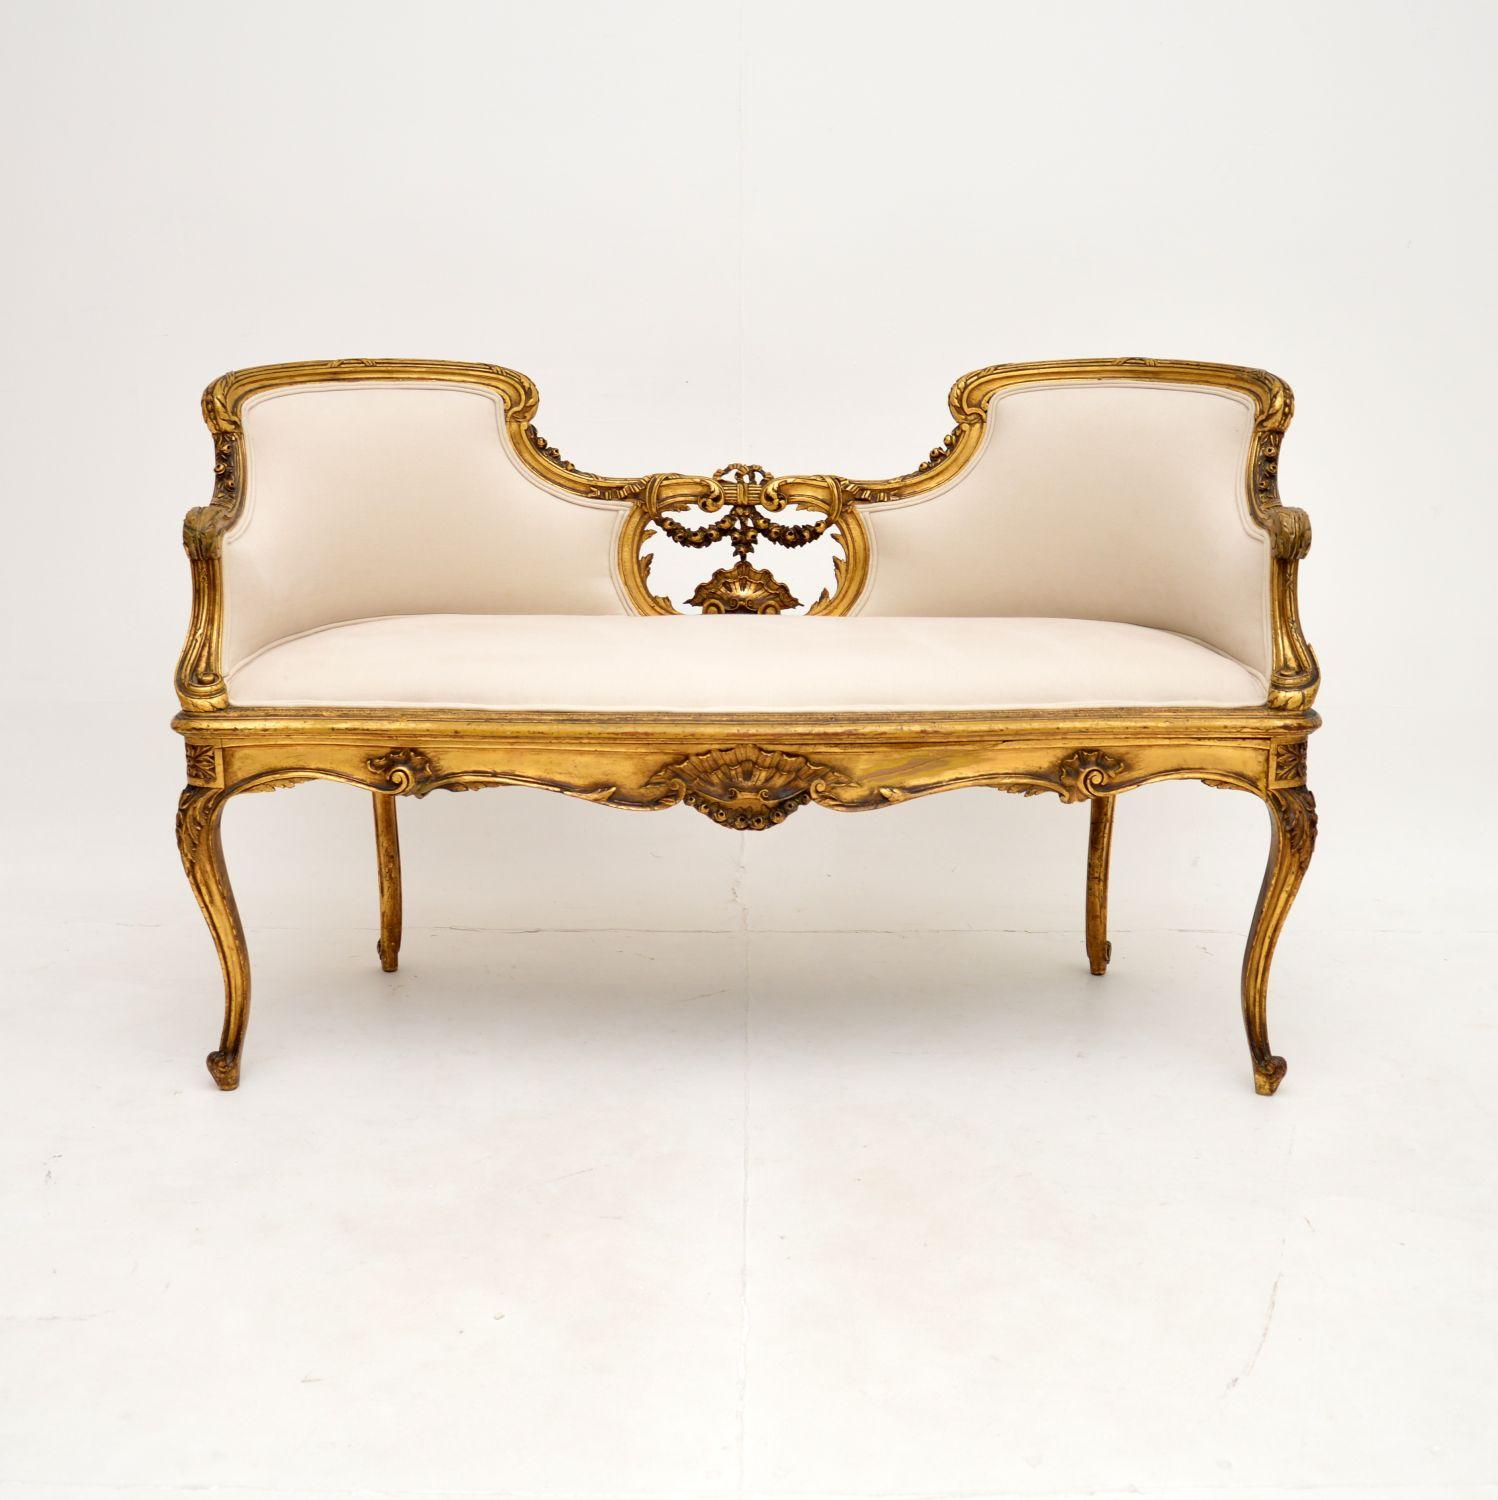 An absolutely stunning antique French carved gilt wood settee of the highest order. This was made in France, it dates from around the 1880-1900 period.

It is of amazing quality, with beautiful and intricate carving throughout. It is a lovely size,